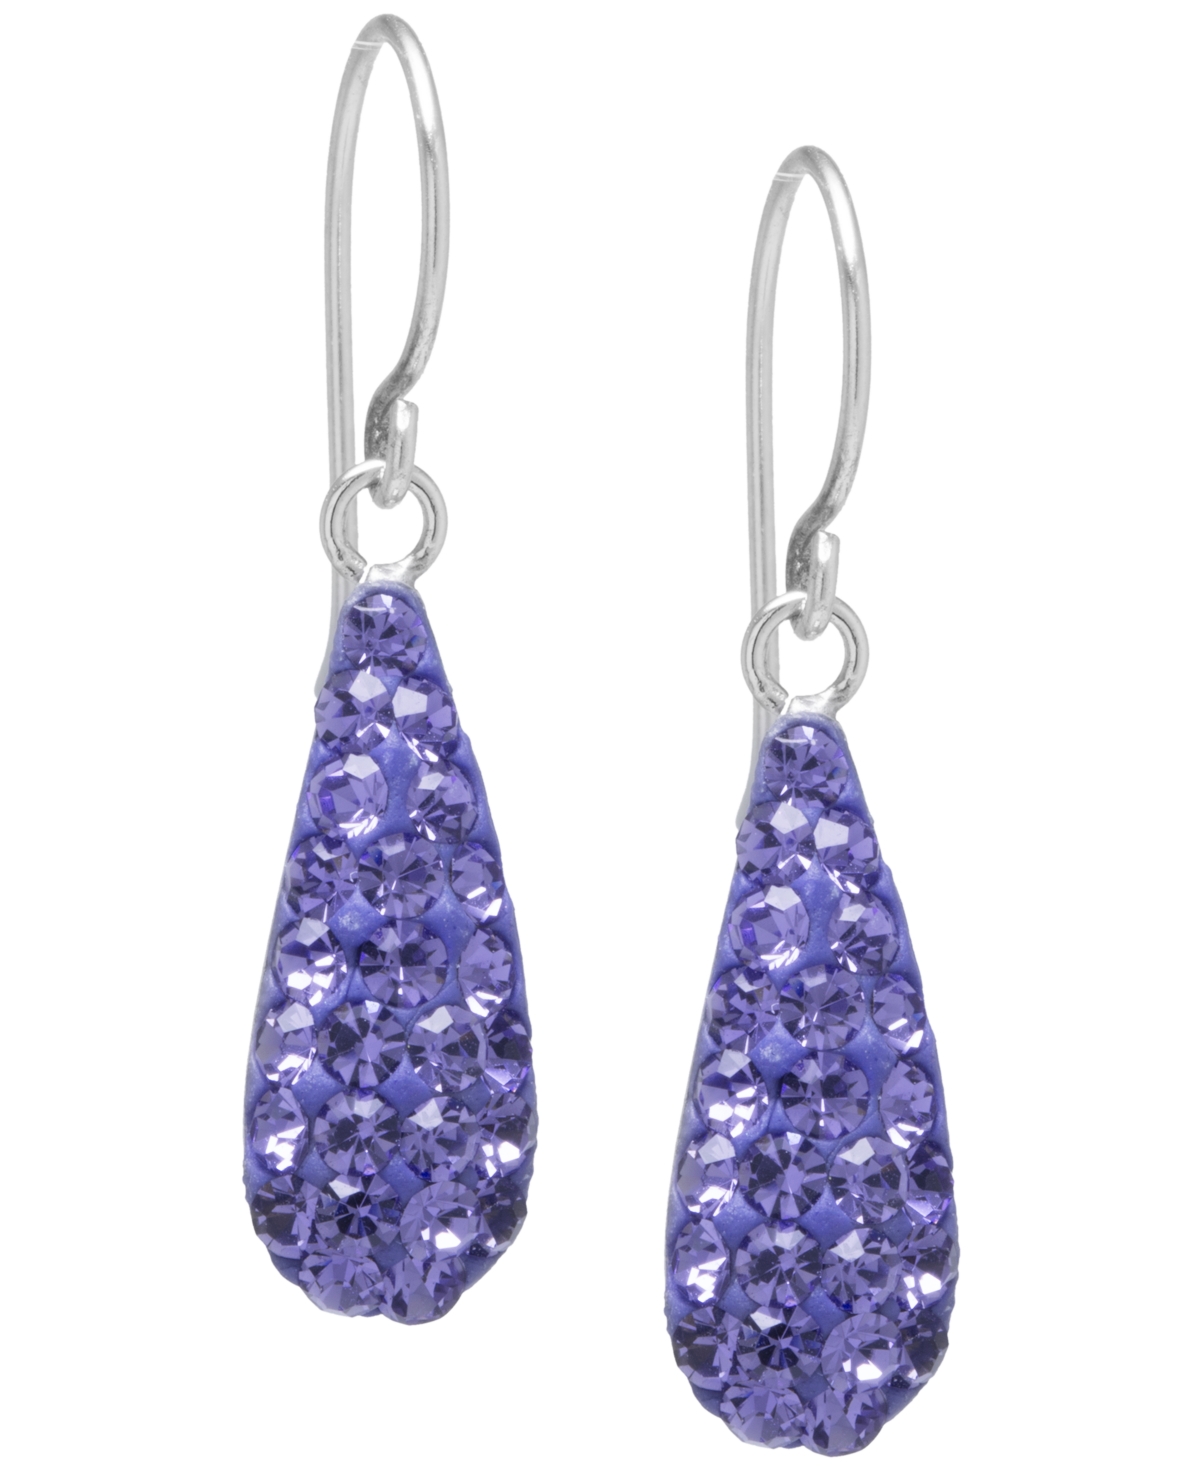 Pave Crystal Teardrop Earrings in Sterling Silver. Available in Clear, Black, Blue, Multi, Purple or Red - BLACK